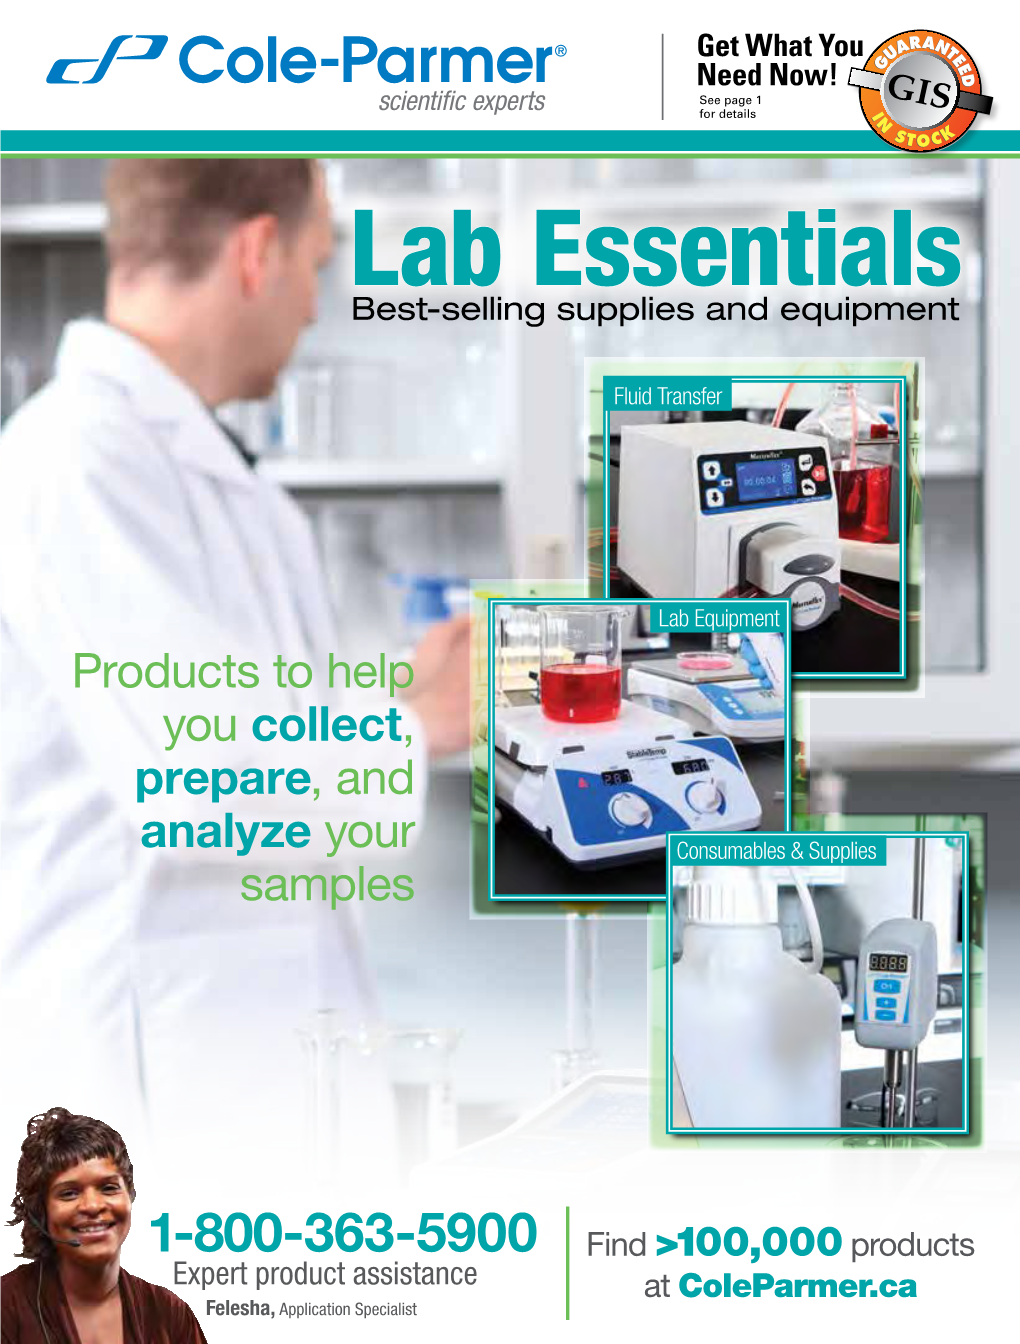 Lab Essentials Best-Selling Supplies and Equipment